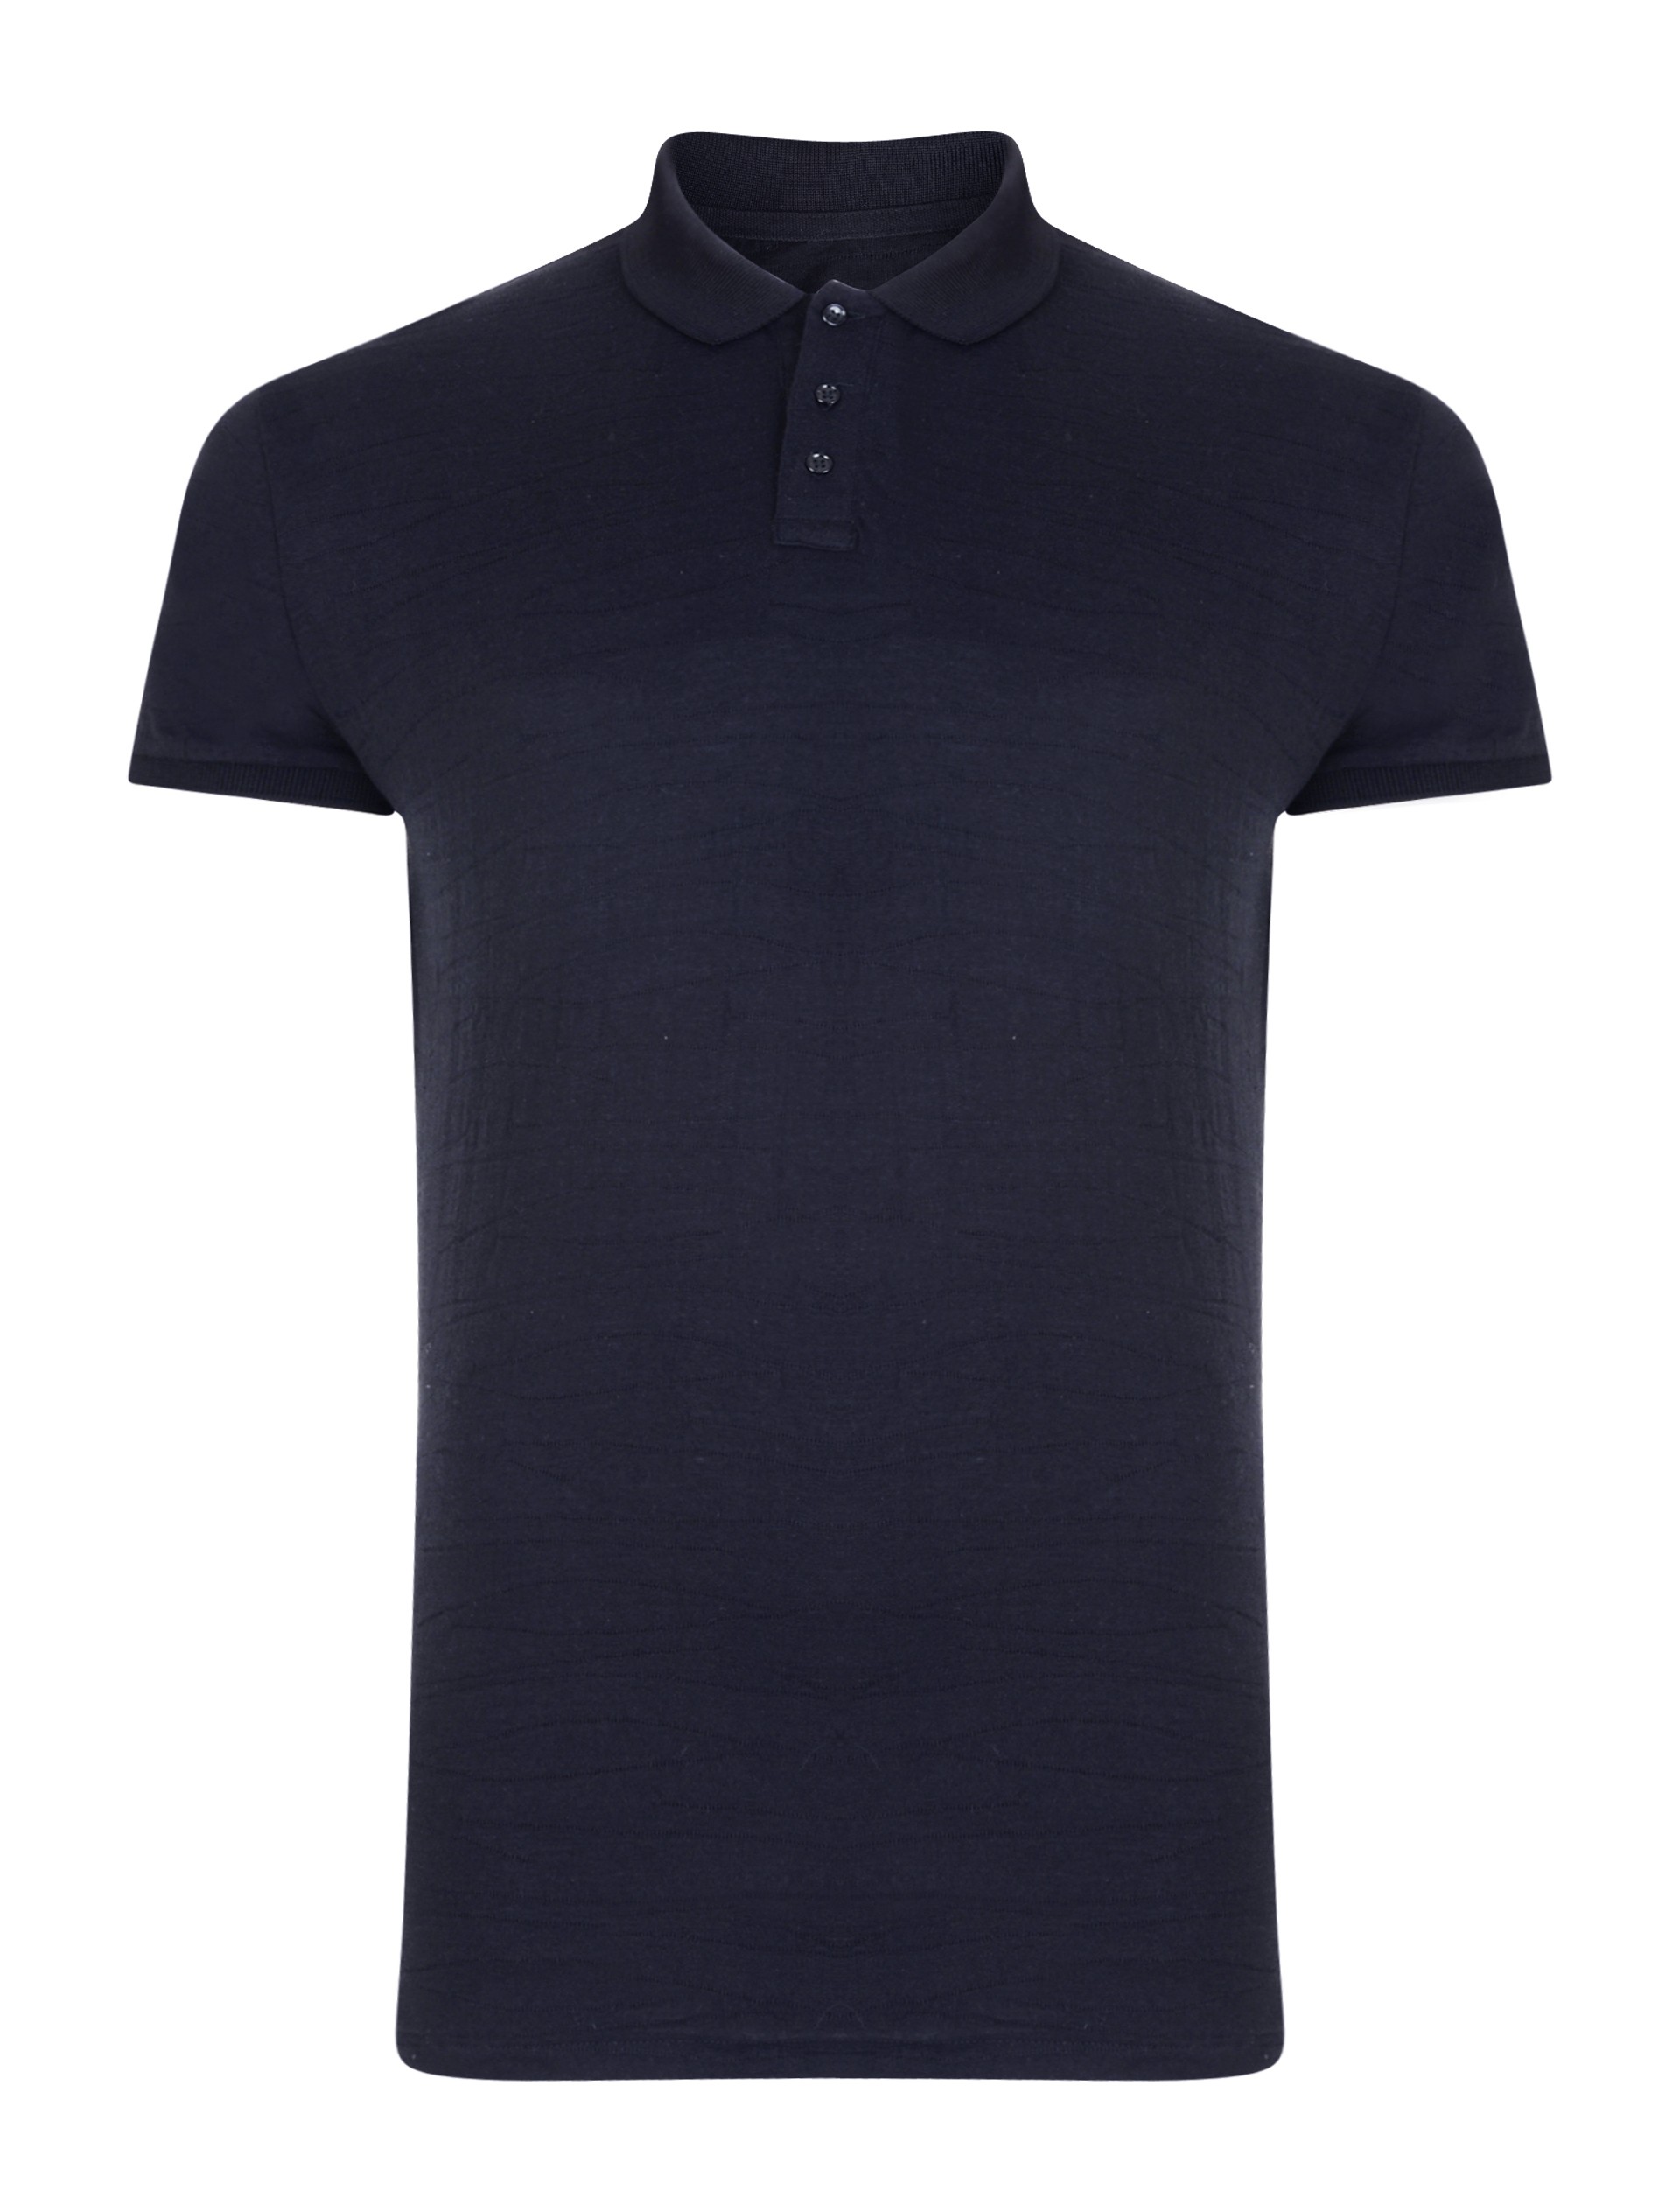 Mens Polo Shirts | Bellfield Clothing | Free UK Delivery